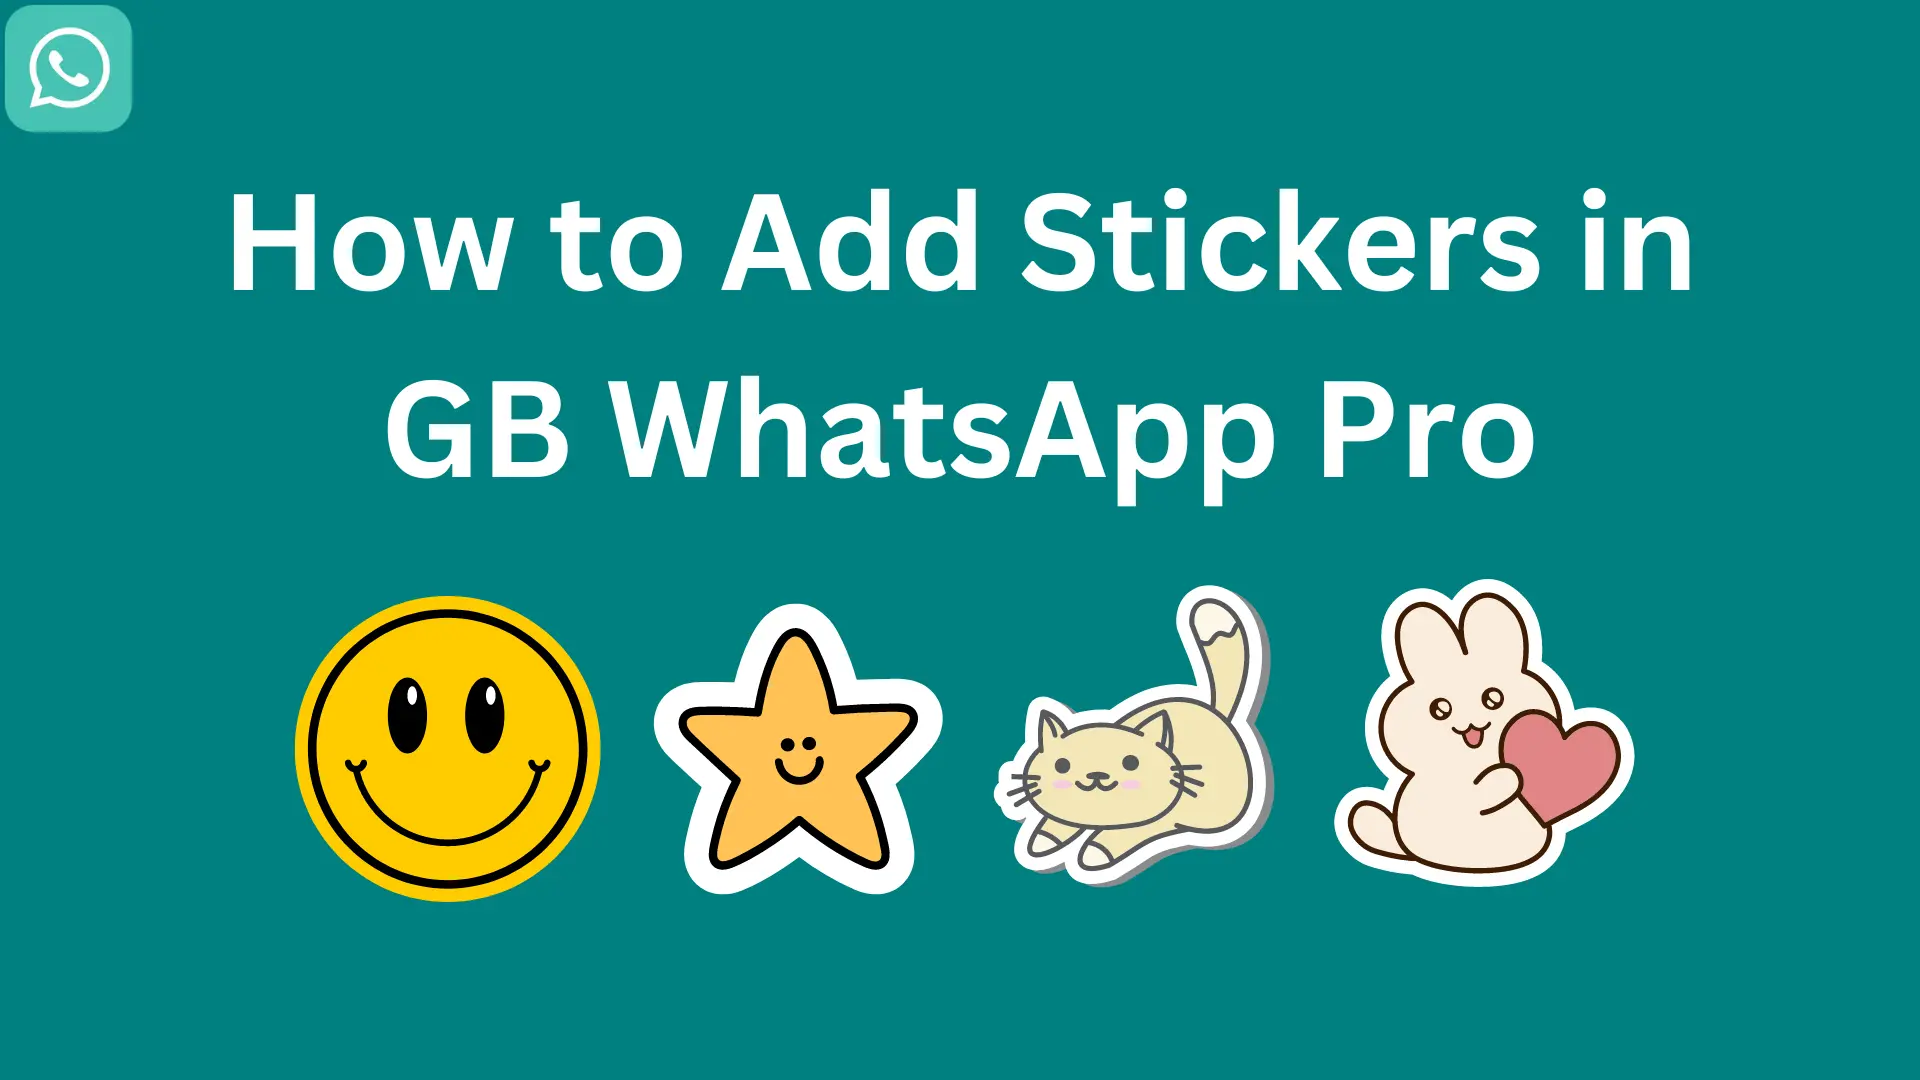 how-to-add-stickers-in-gb-whatsapp-pro-featured-image